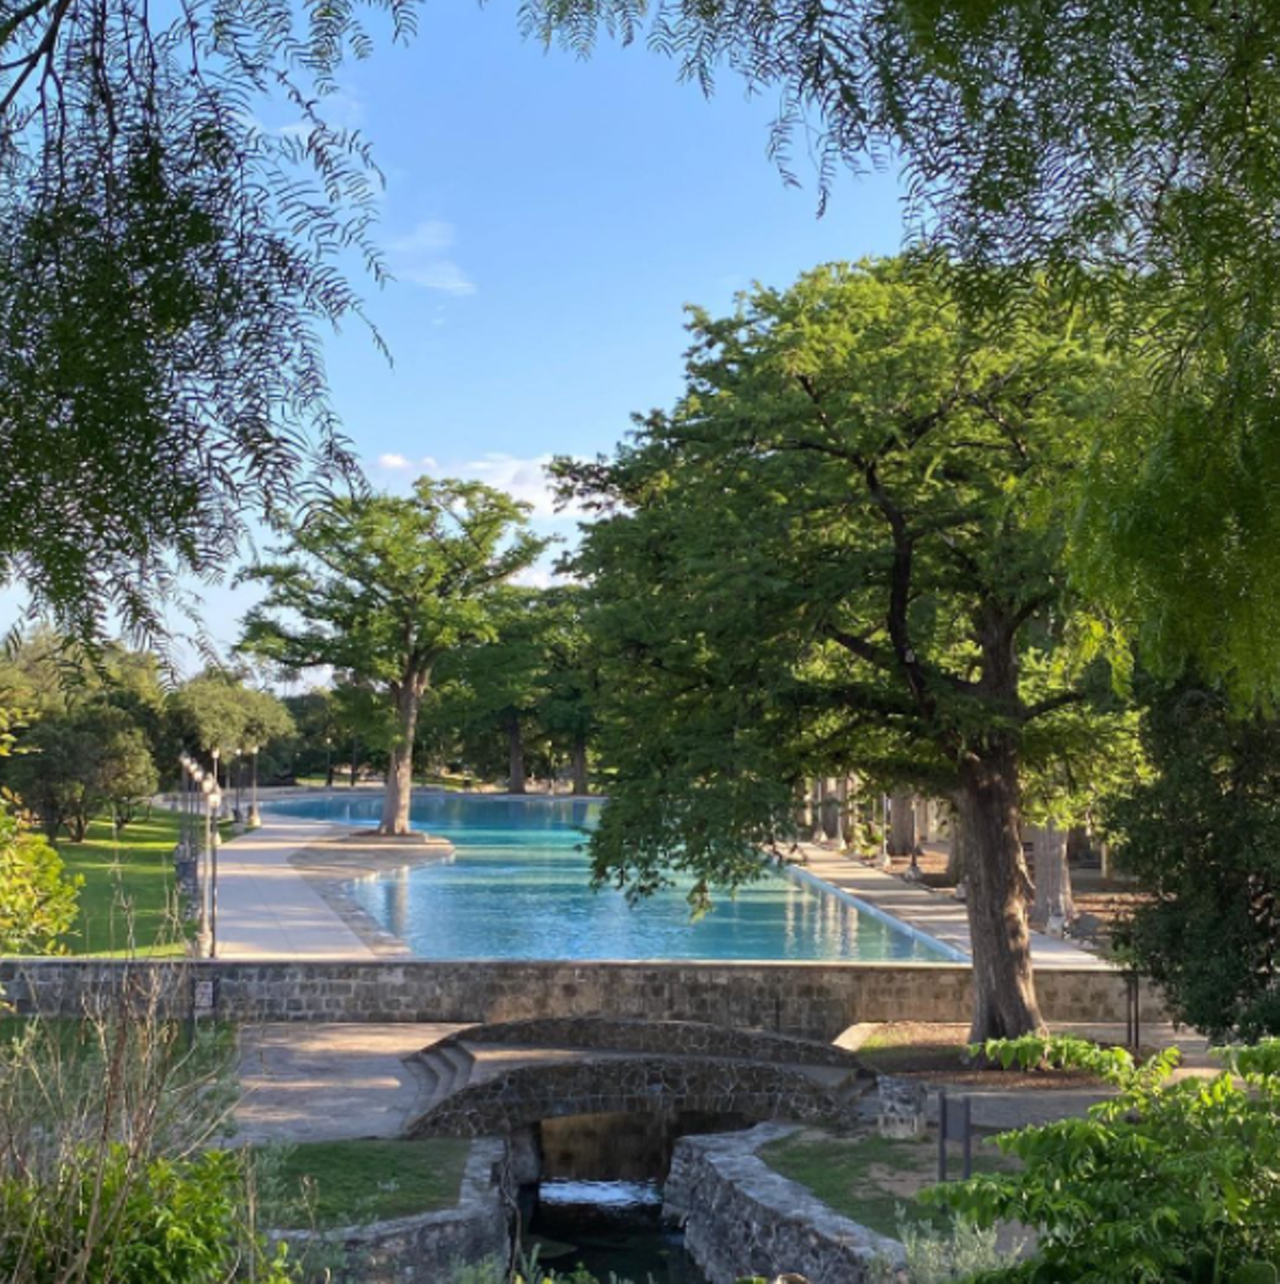 Swim at San Pedro Springs Park
2200 N. Flores, (210) 732-5992, sanantonio.gov
With free open swim on Monday, Wednesday, Friday and weekend afternoons, who’s to say no to a dip in one of San Antonio’s biggest pools, located in the second-oldest park in the country.
Photo via Instagram / caroleckelkamp